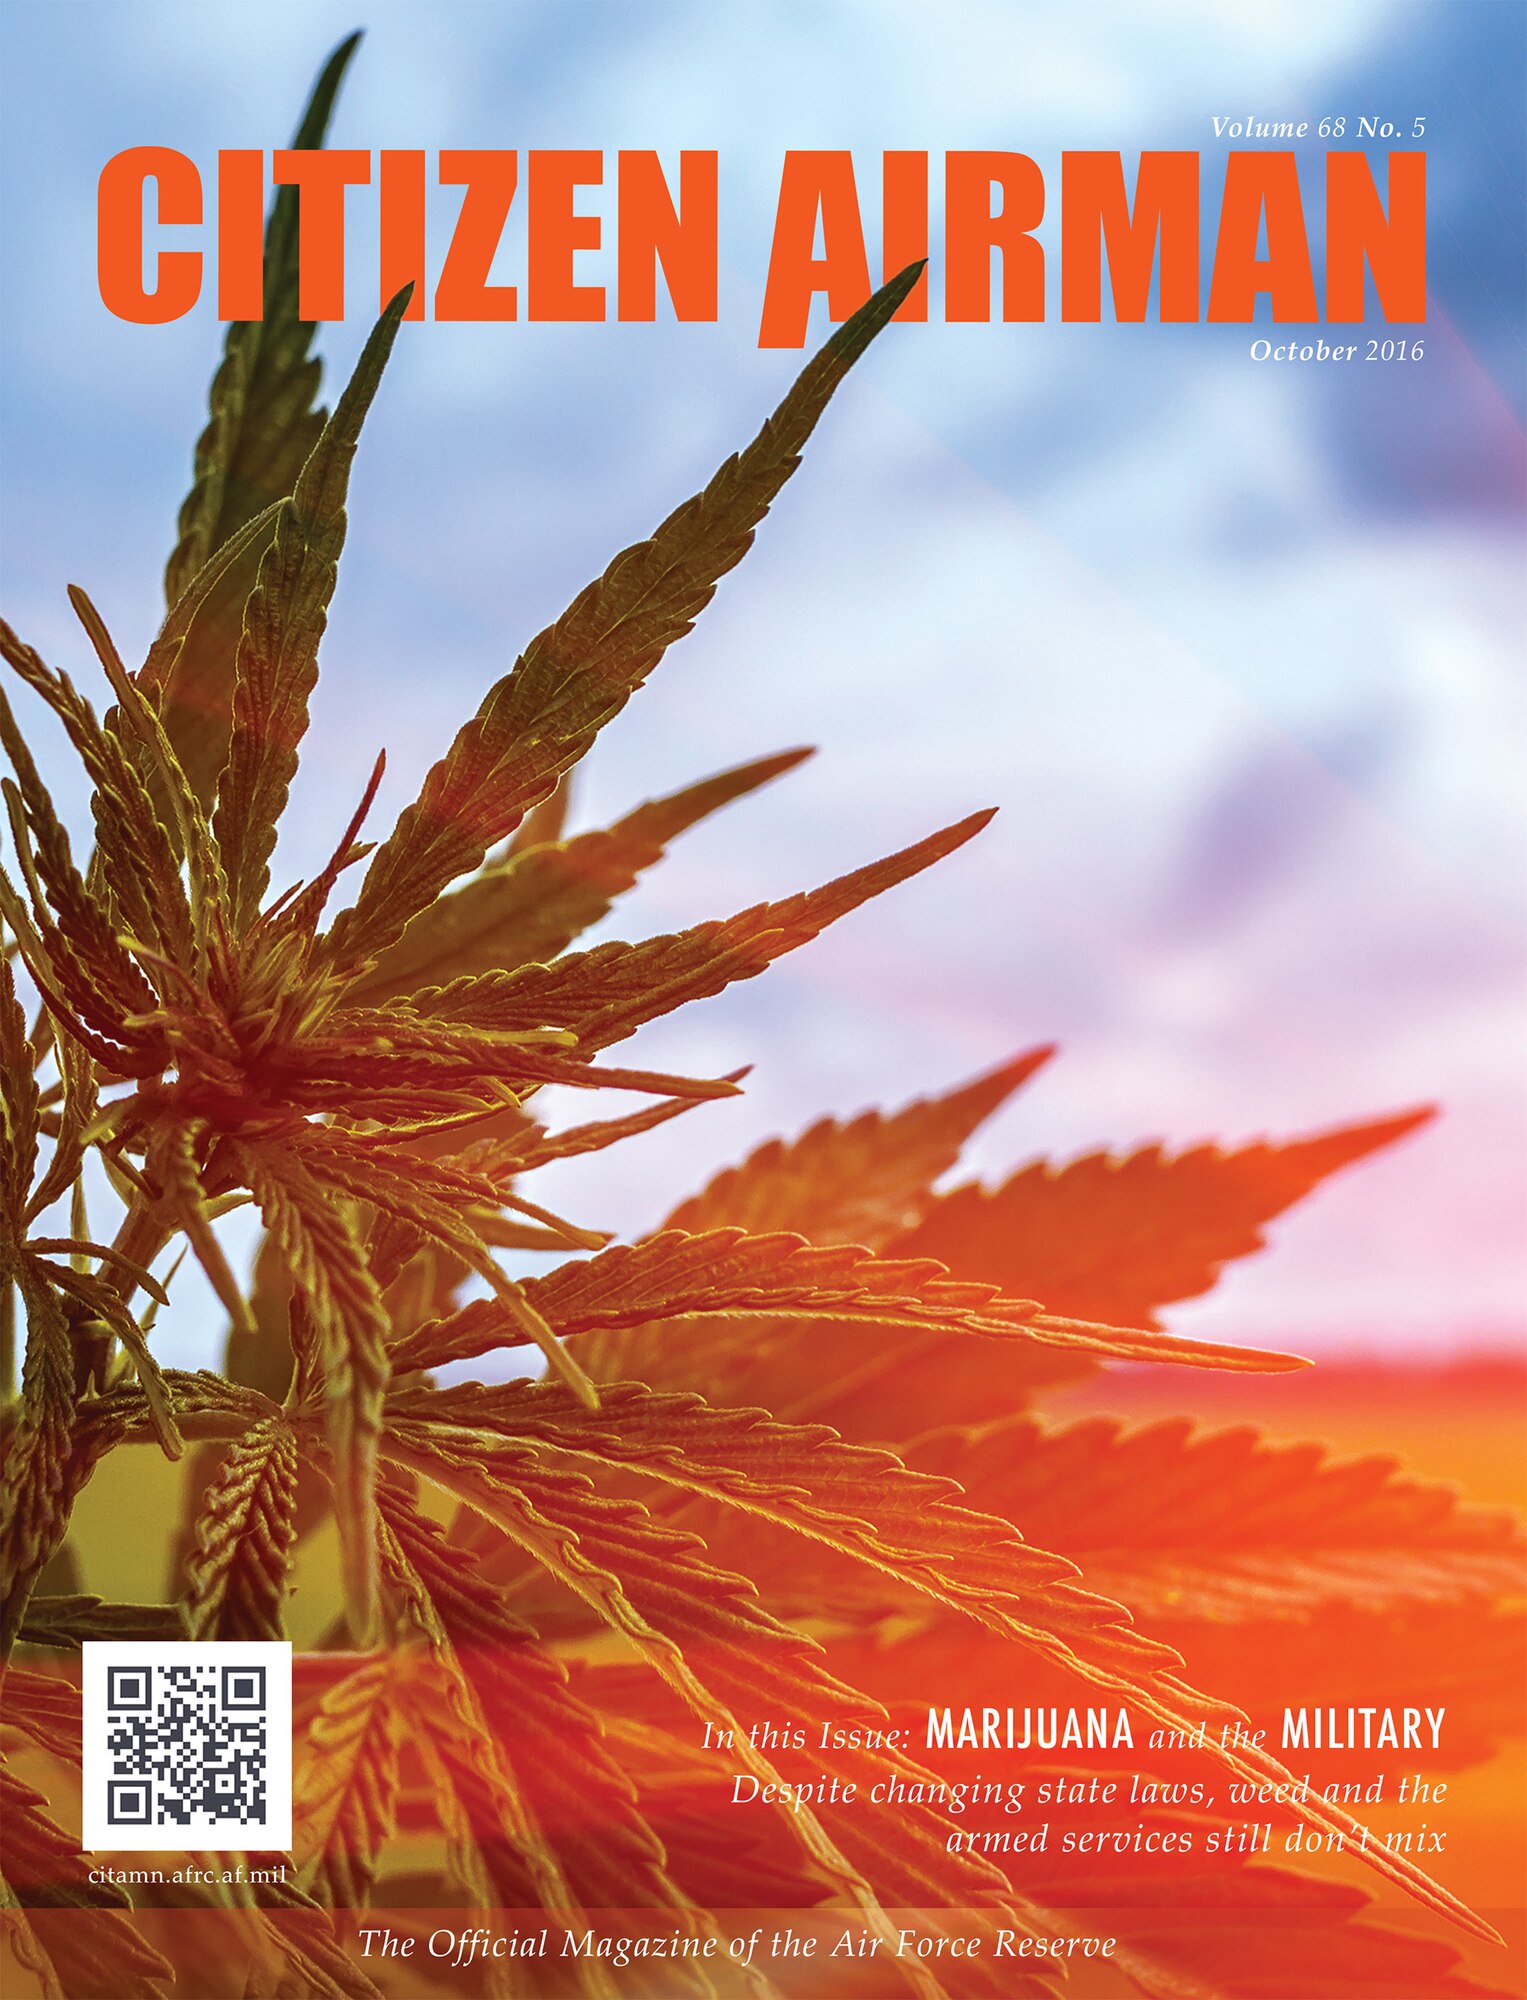 The October issue of Citizen Airman magazine is available at http://www.citamn.afrc.af.mil/. The cover story reminds Reservists that even though state laws regarding marijuana use are changing, weed and the armed forces still don't mix.